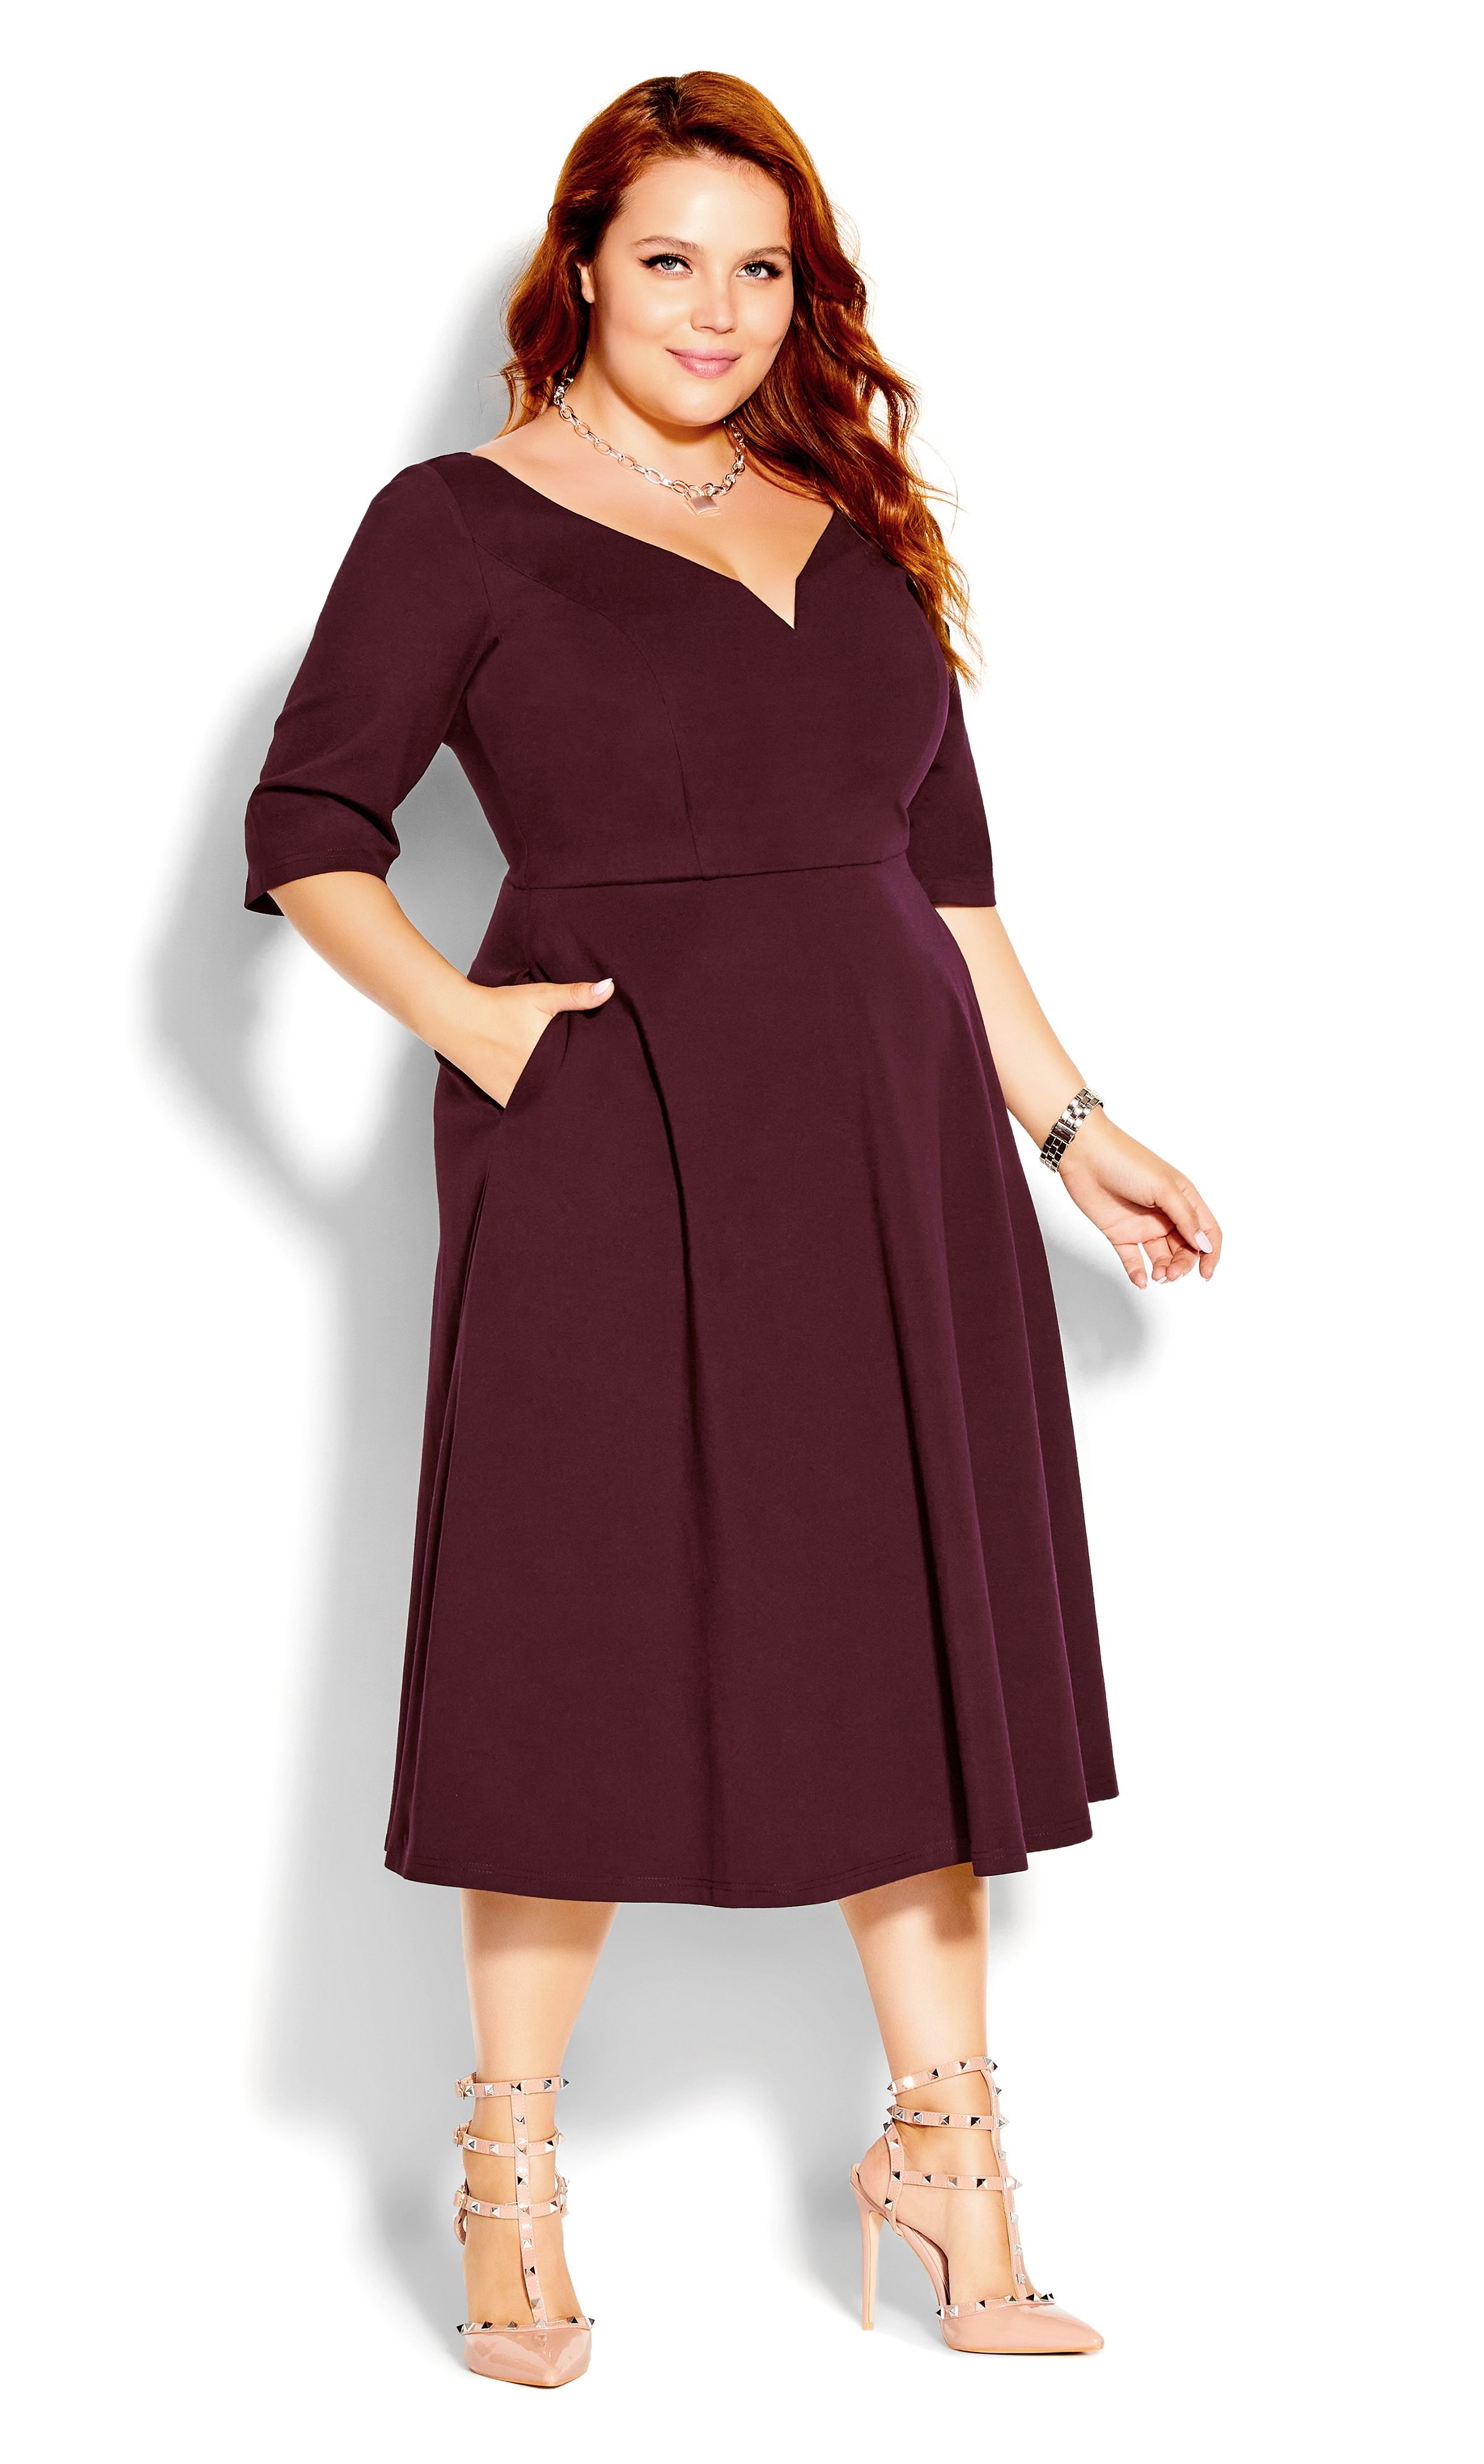 Be the picture of elegance in the sleek Cute Girl Sleeved Dress. With a flirty yet demure sweetheart V-neckline, sleeve coverage, and A-line flare, this darling number is perfect for date night! Key Features Include: - Deep sweetheart V-neckline - Elbow sleeves - A-line skirt - Lined to the waist - Side pockets - Heavyweight stretch fabrication Pair with sleek pumps and a ruby lip for a classic look.